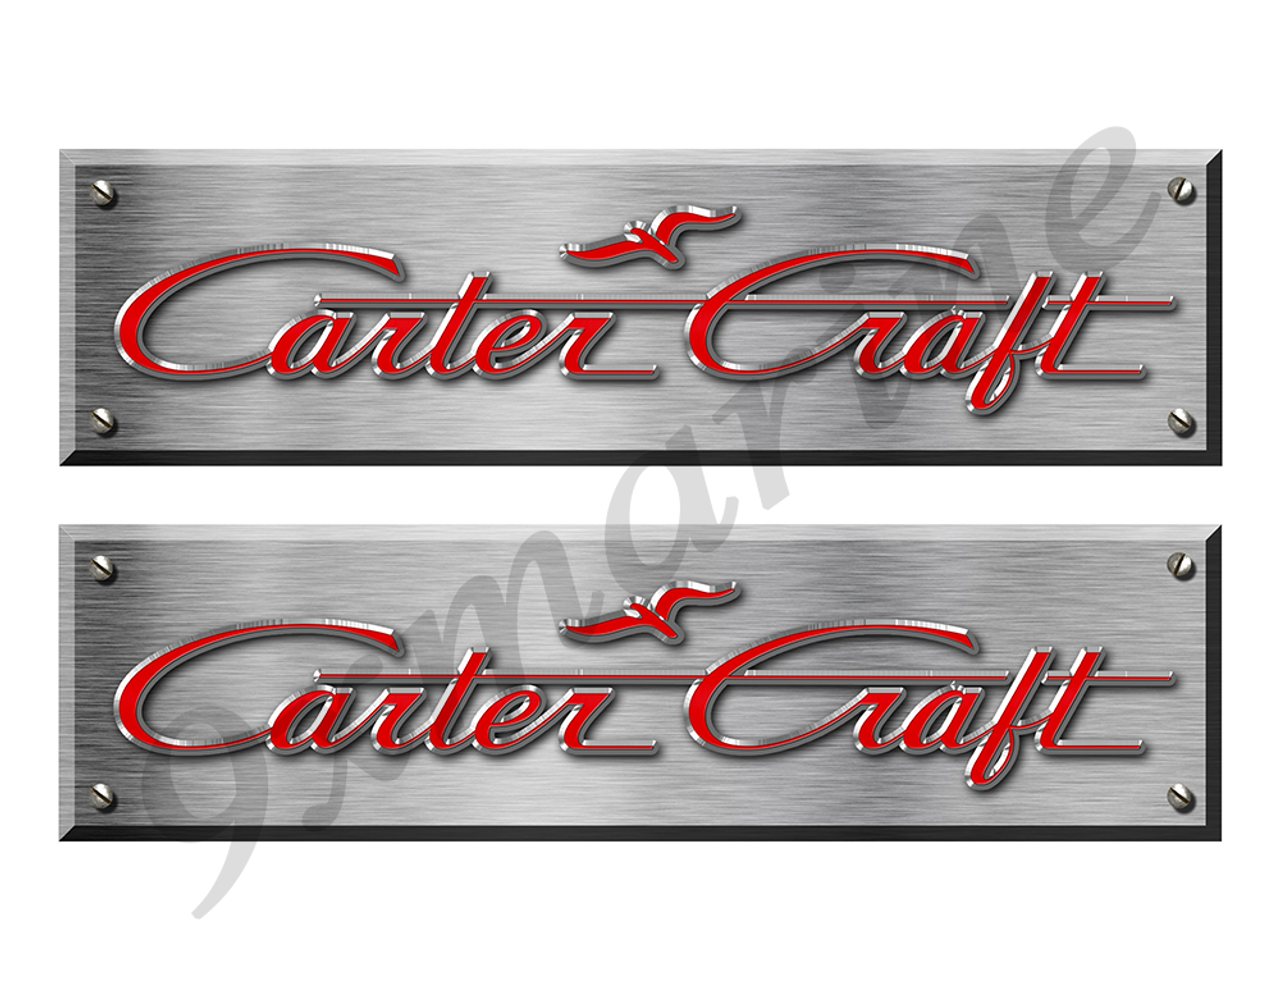 Carter Craft Remastered Stickers. Brushed Metal Style - 10" long